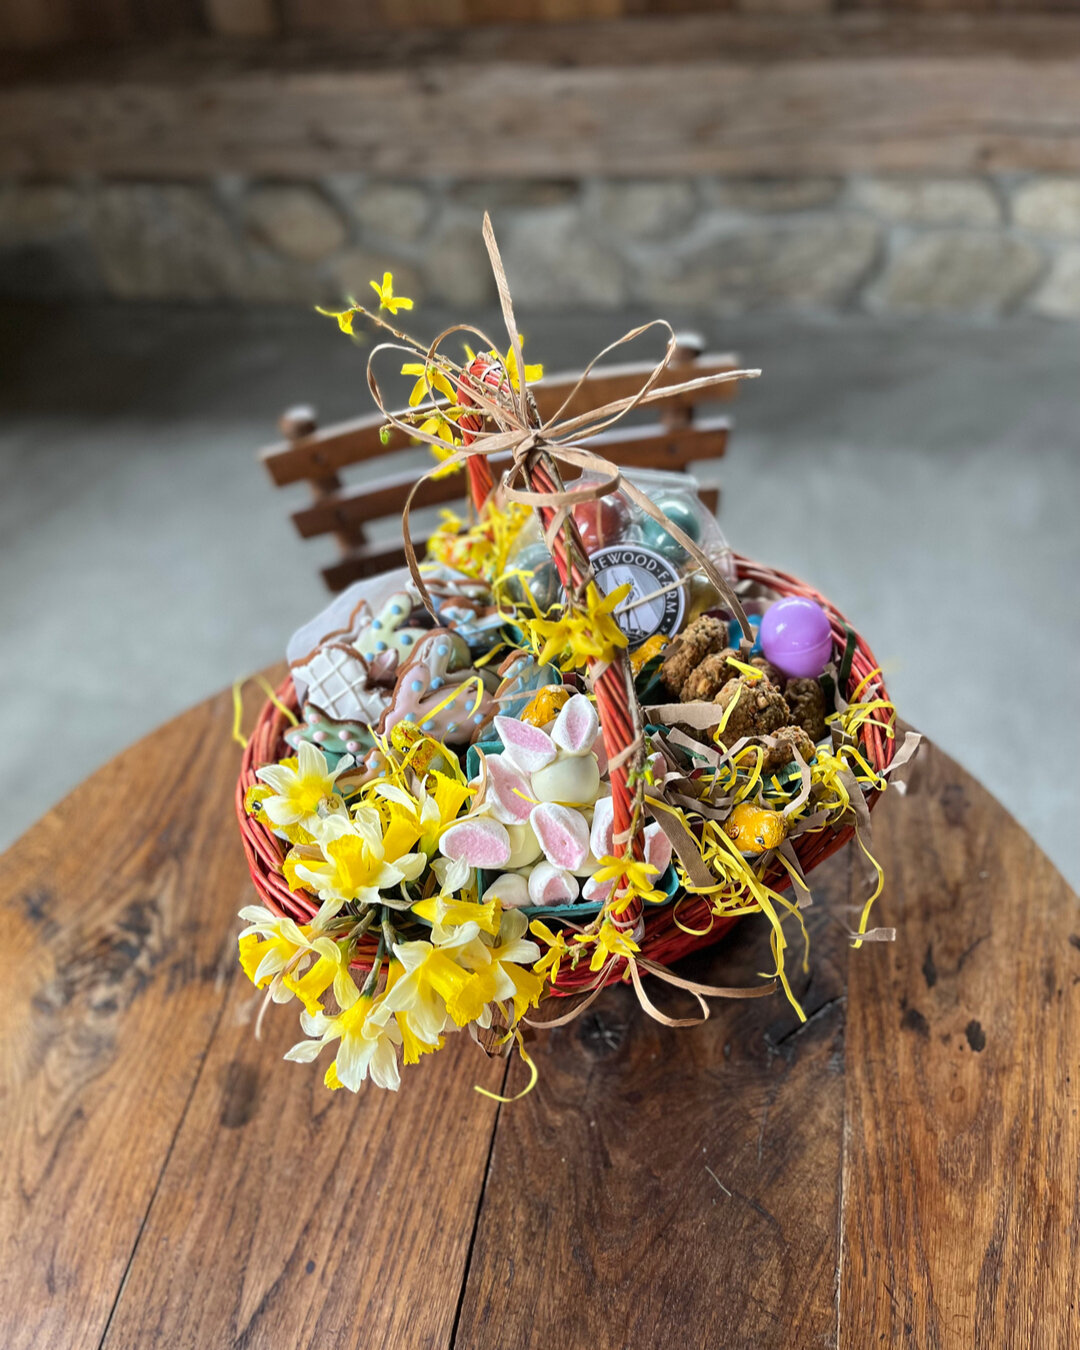 It's almost Easter! Here on the Farm, we're already celebrating. We created a beautiful Easter basket to share with the staff and residents of Cardinal Hayes Home for Children. ​​​​​​​​​
We decorated the basket with blooming forsythia and then filled